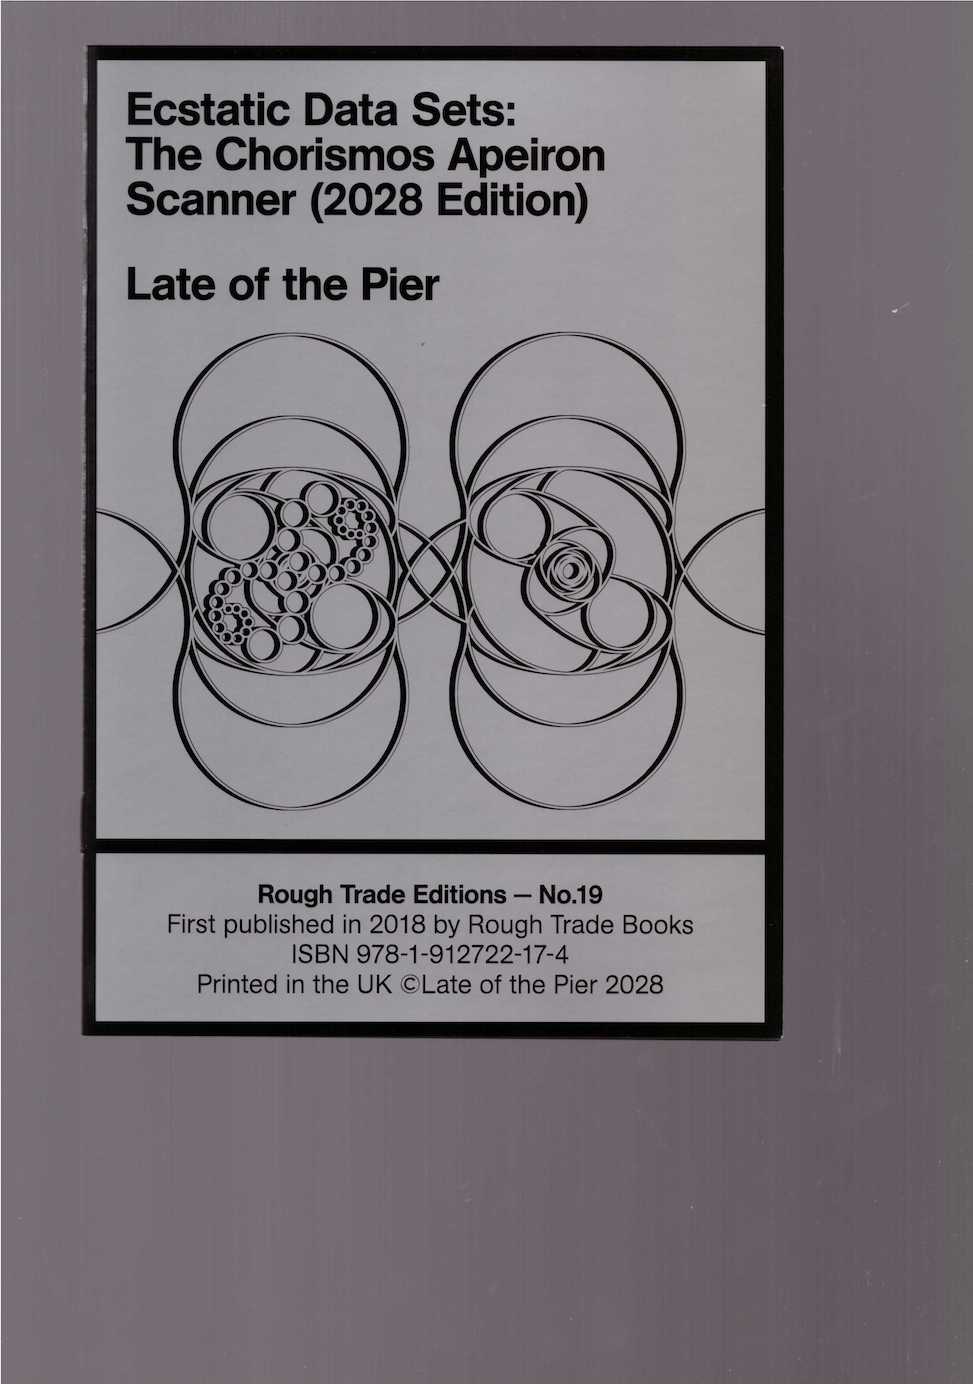 LATE OF THE PIER - Rough Trade Editions #19: Ecstatic Data Sets: The Chorismos Apeiron Scanner (2028 Edition)